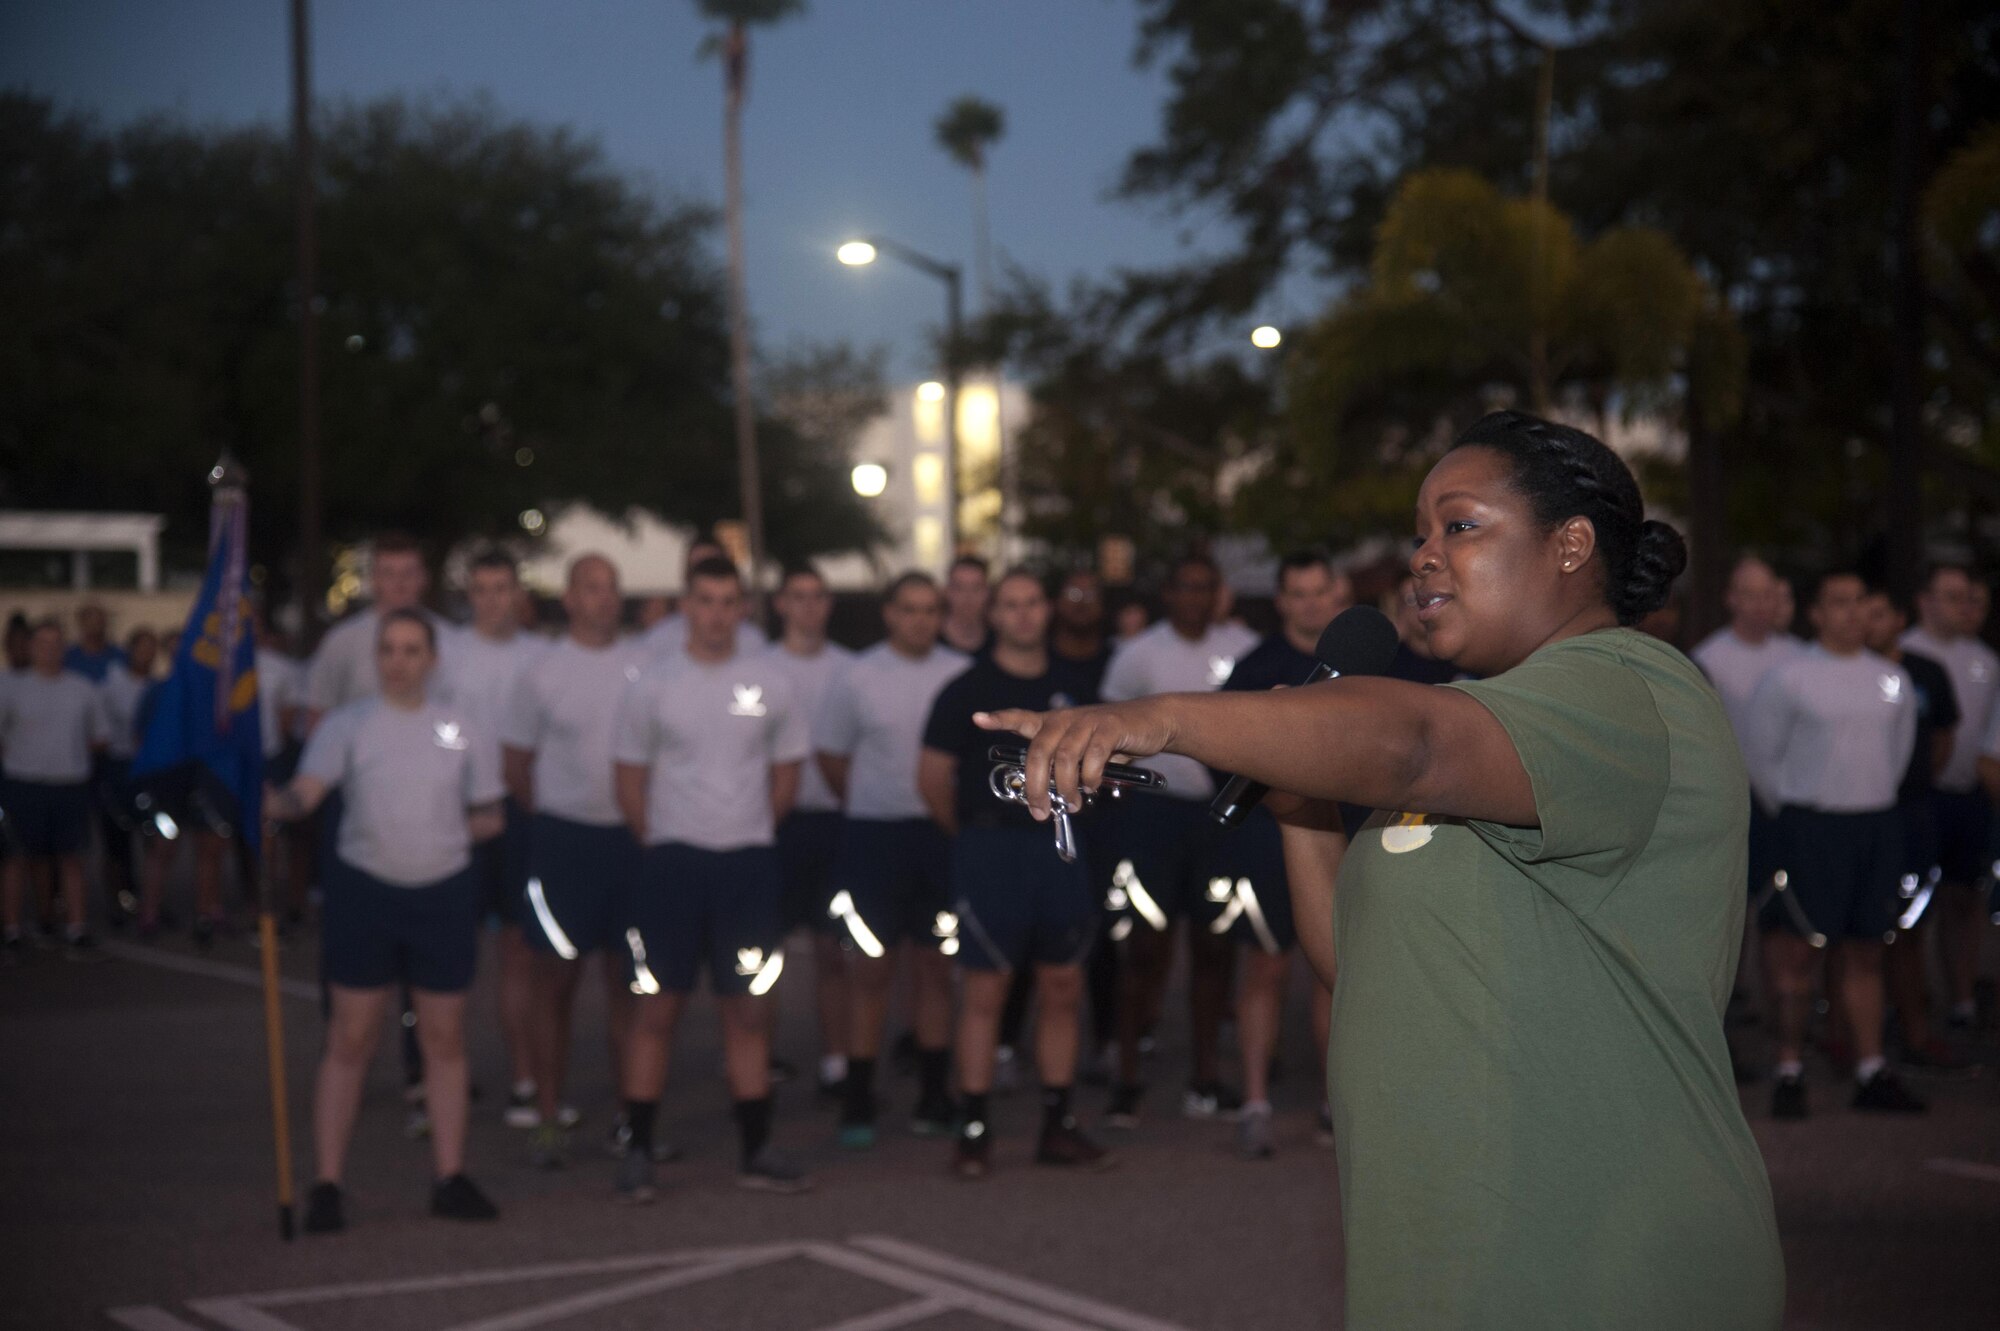 A member of Maj. Raymond Estelle’s family gives closing remarks before the start of the 4th annual 5k and weight lifting competition at MacDill Air Force Base, Fla., Jan. 13, 2017. The event was organized by the 6th Communications Squadron to honor Estelle for paying the ultimate sacrifice. (U.S. Air Force photo by Airman 1st Class Rito Smith) 